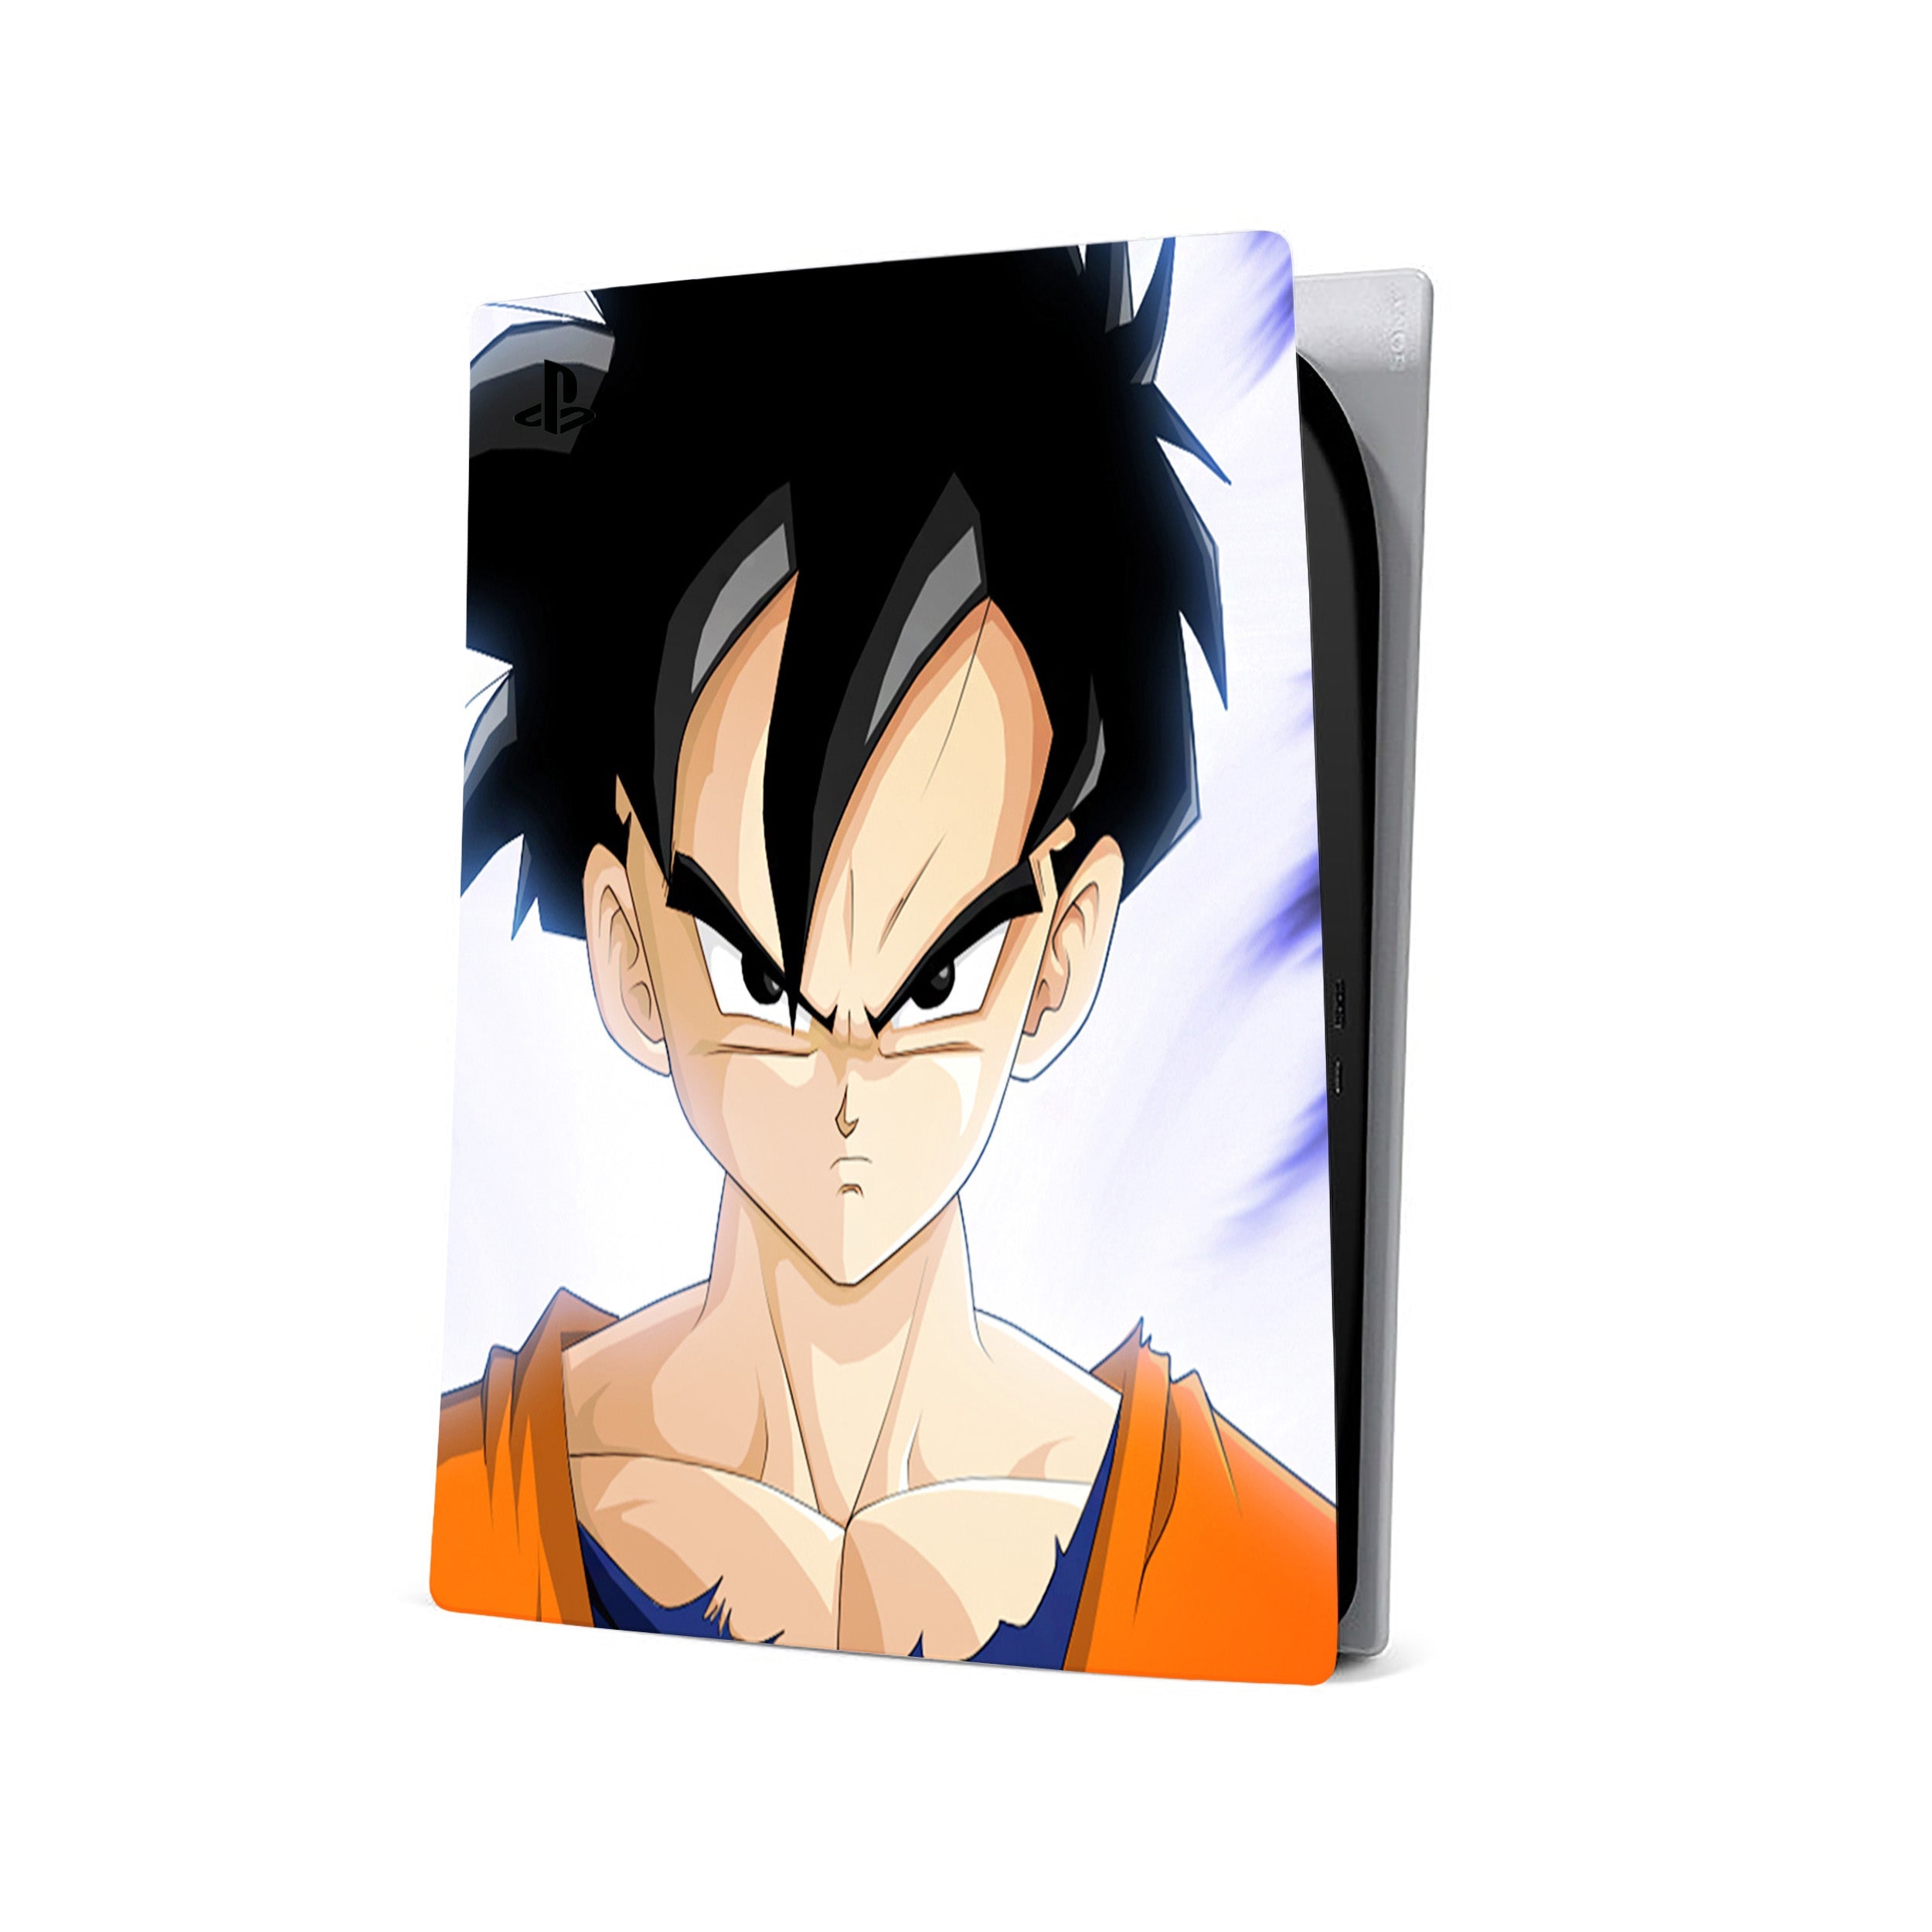 A video game skin featuring a Dragon Ball Z Gohan design for the PS5.